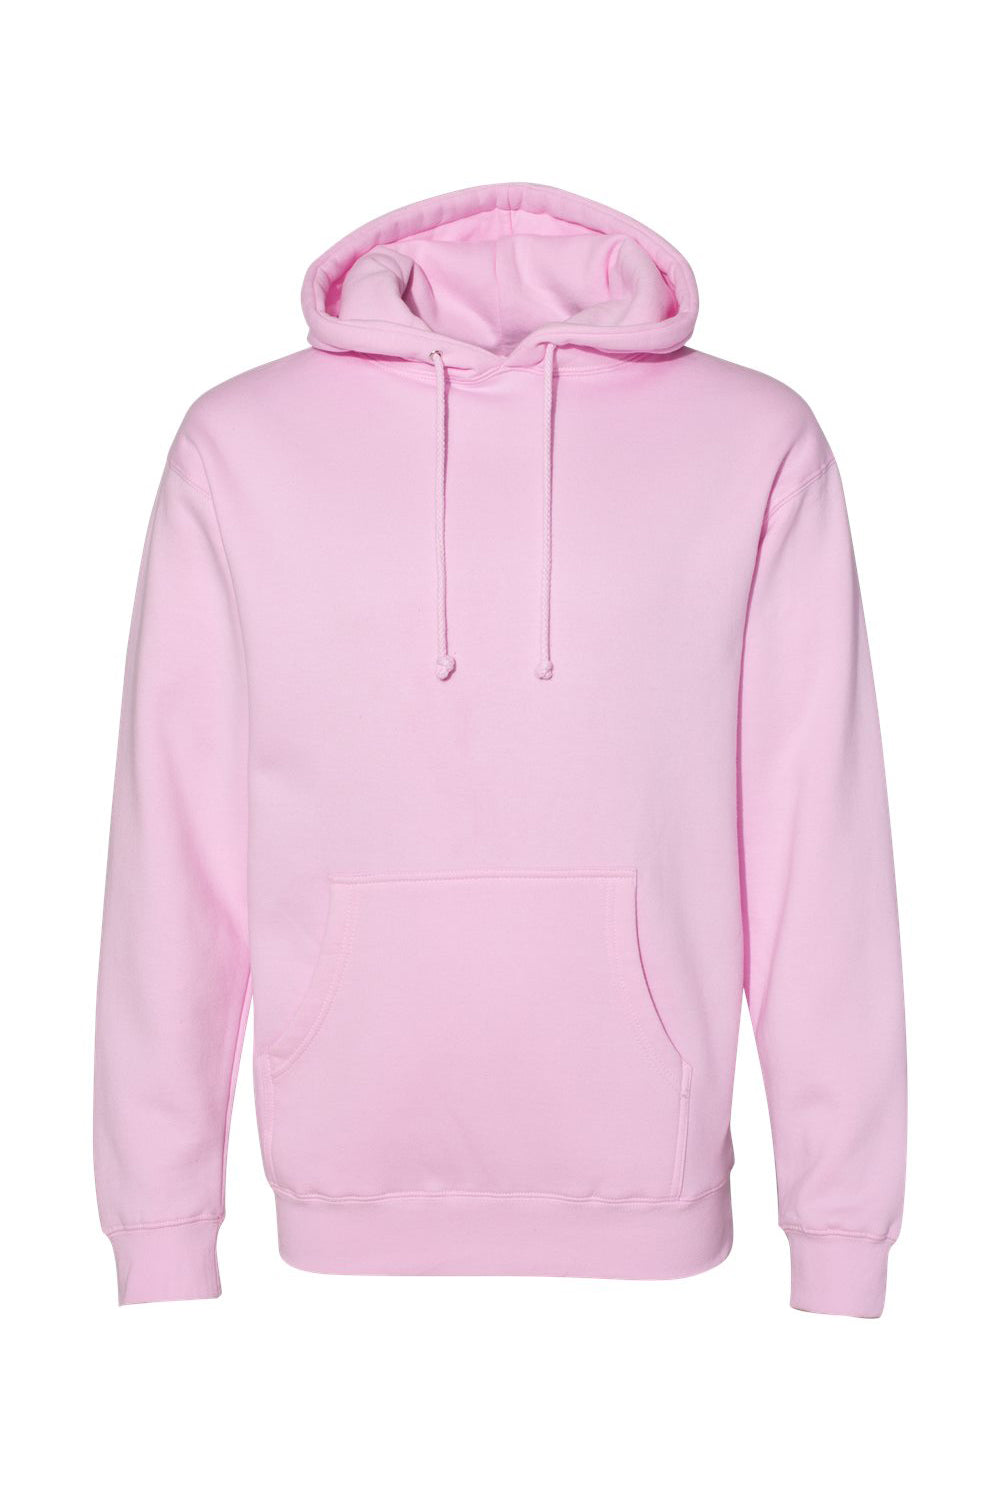 Independent Trading Co. IND4000 Mens Hooded Sweatshirt Hoodie Light Pink Flat Front